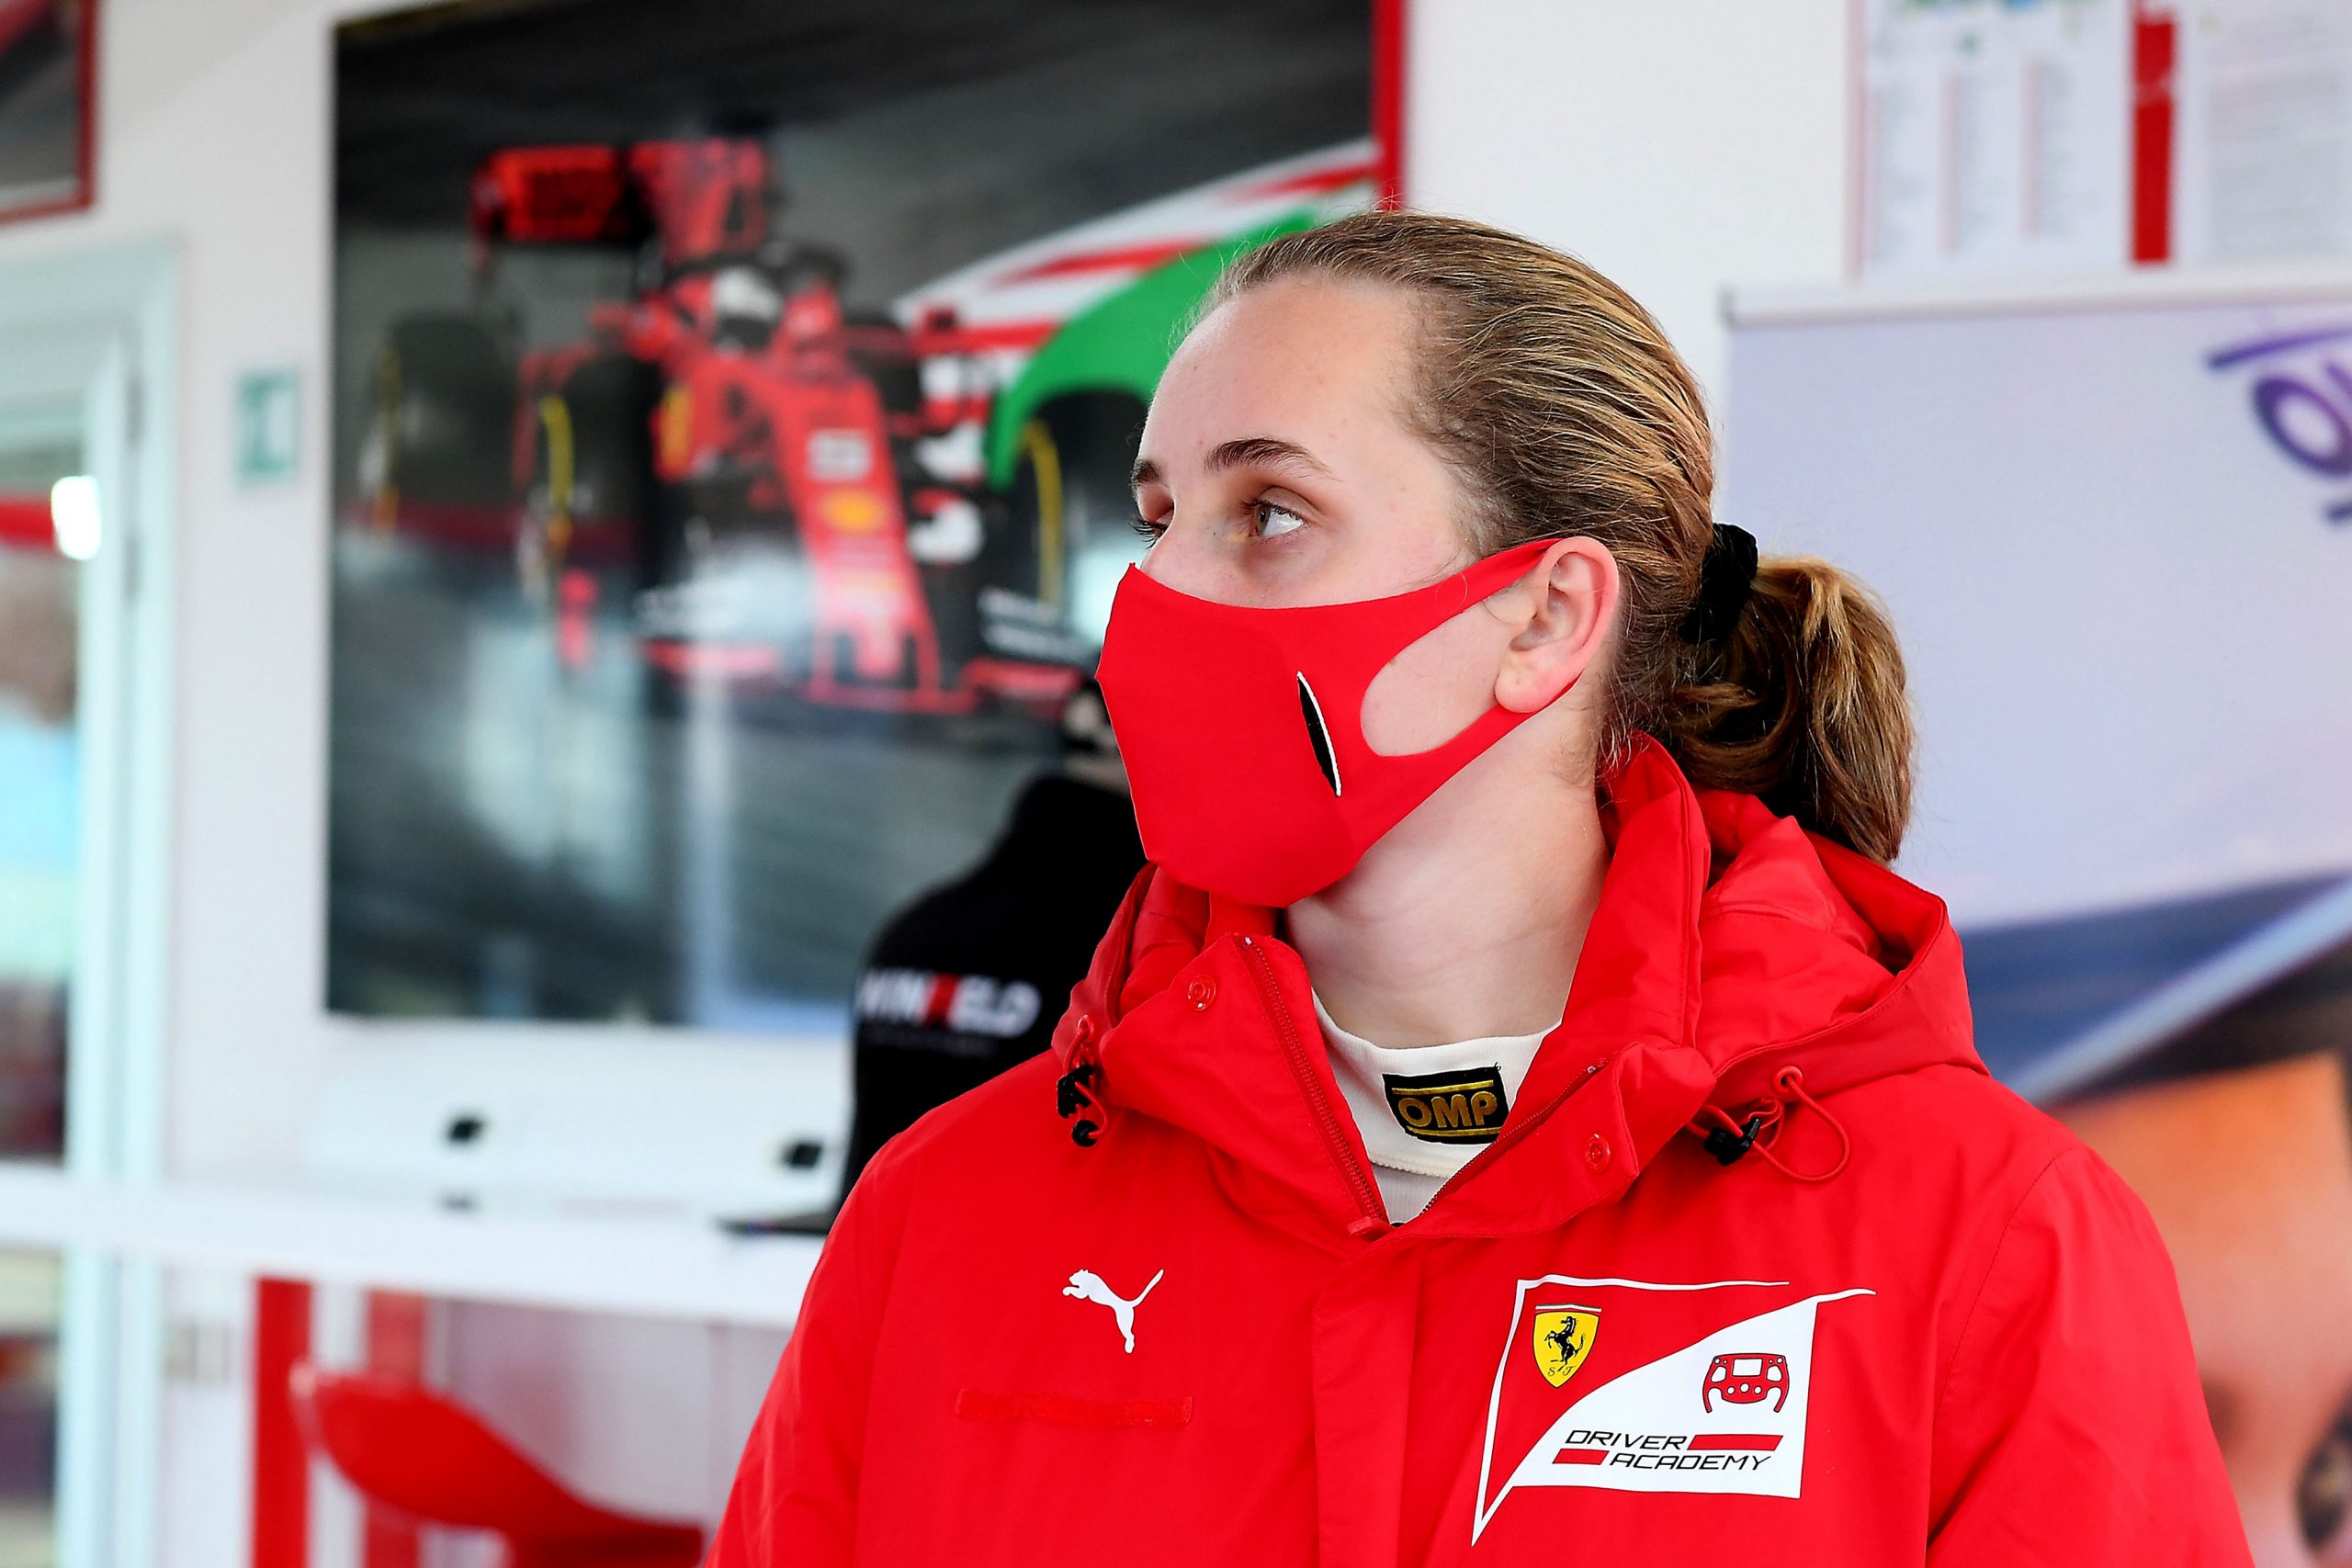 Sixteen-year-old becomes first female driver to join Ferrari Driver Academy